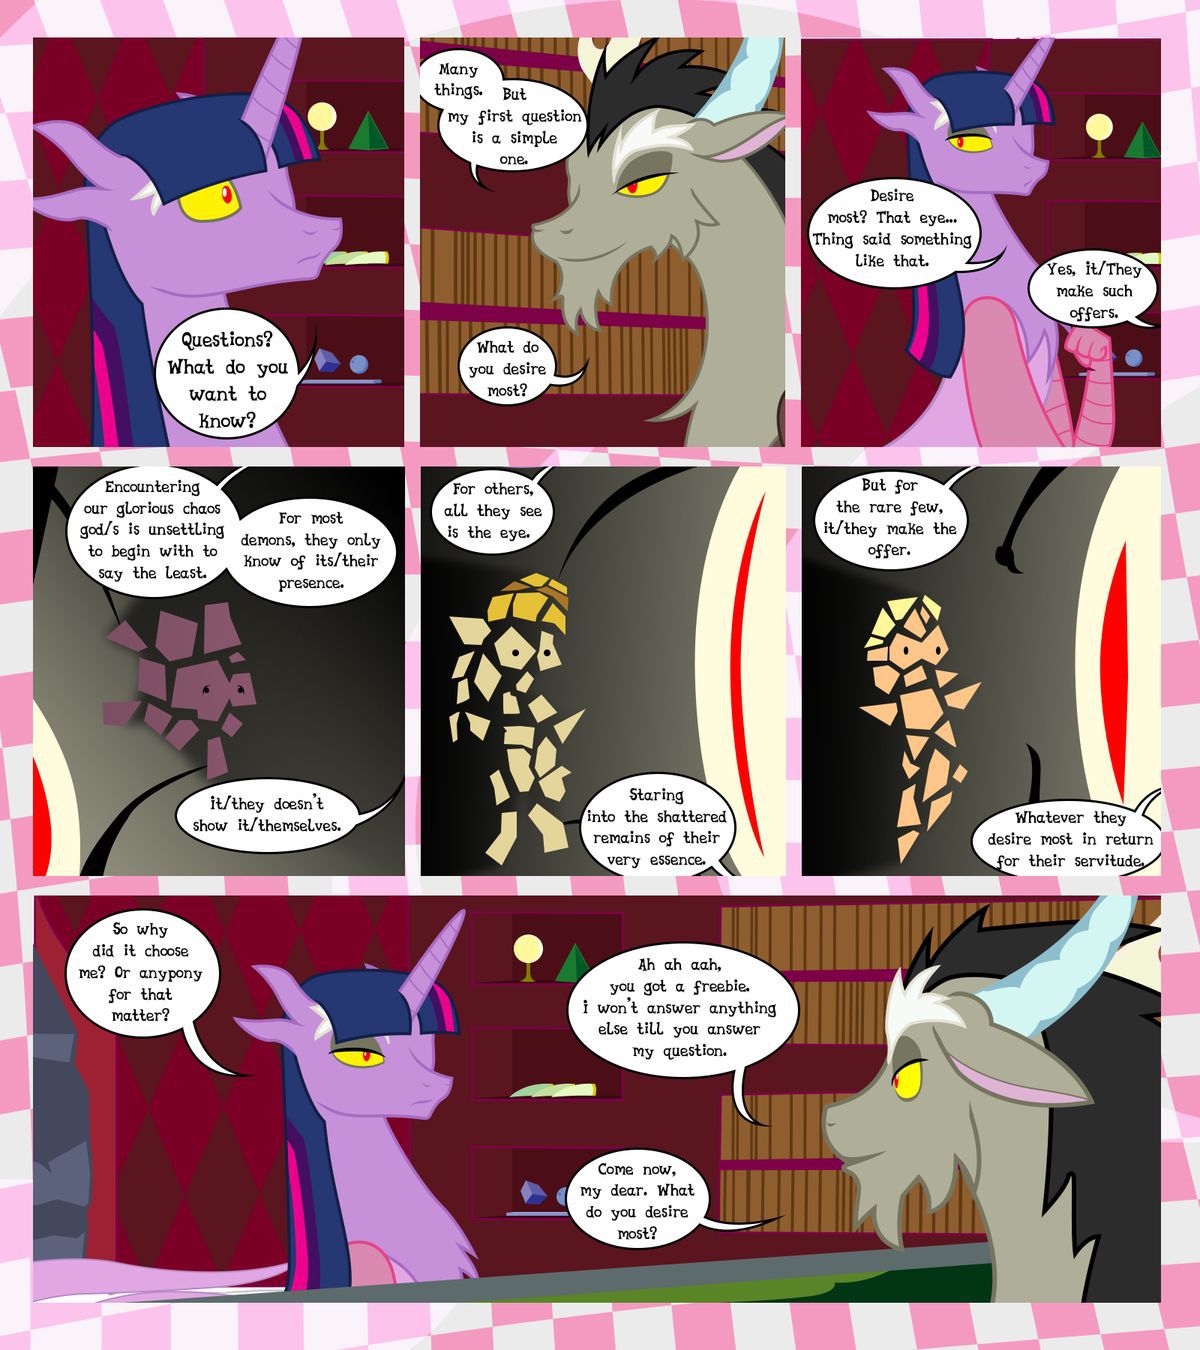 [GatesMcCloud] Cutie Mark Crusaders 10k: Chapter 3 - The Lost (My Little Pony: Friendship is Magic) [English] [Ongoing] 26